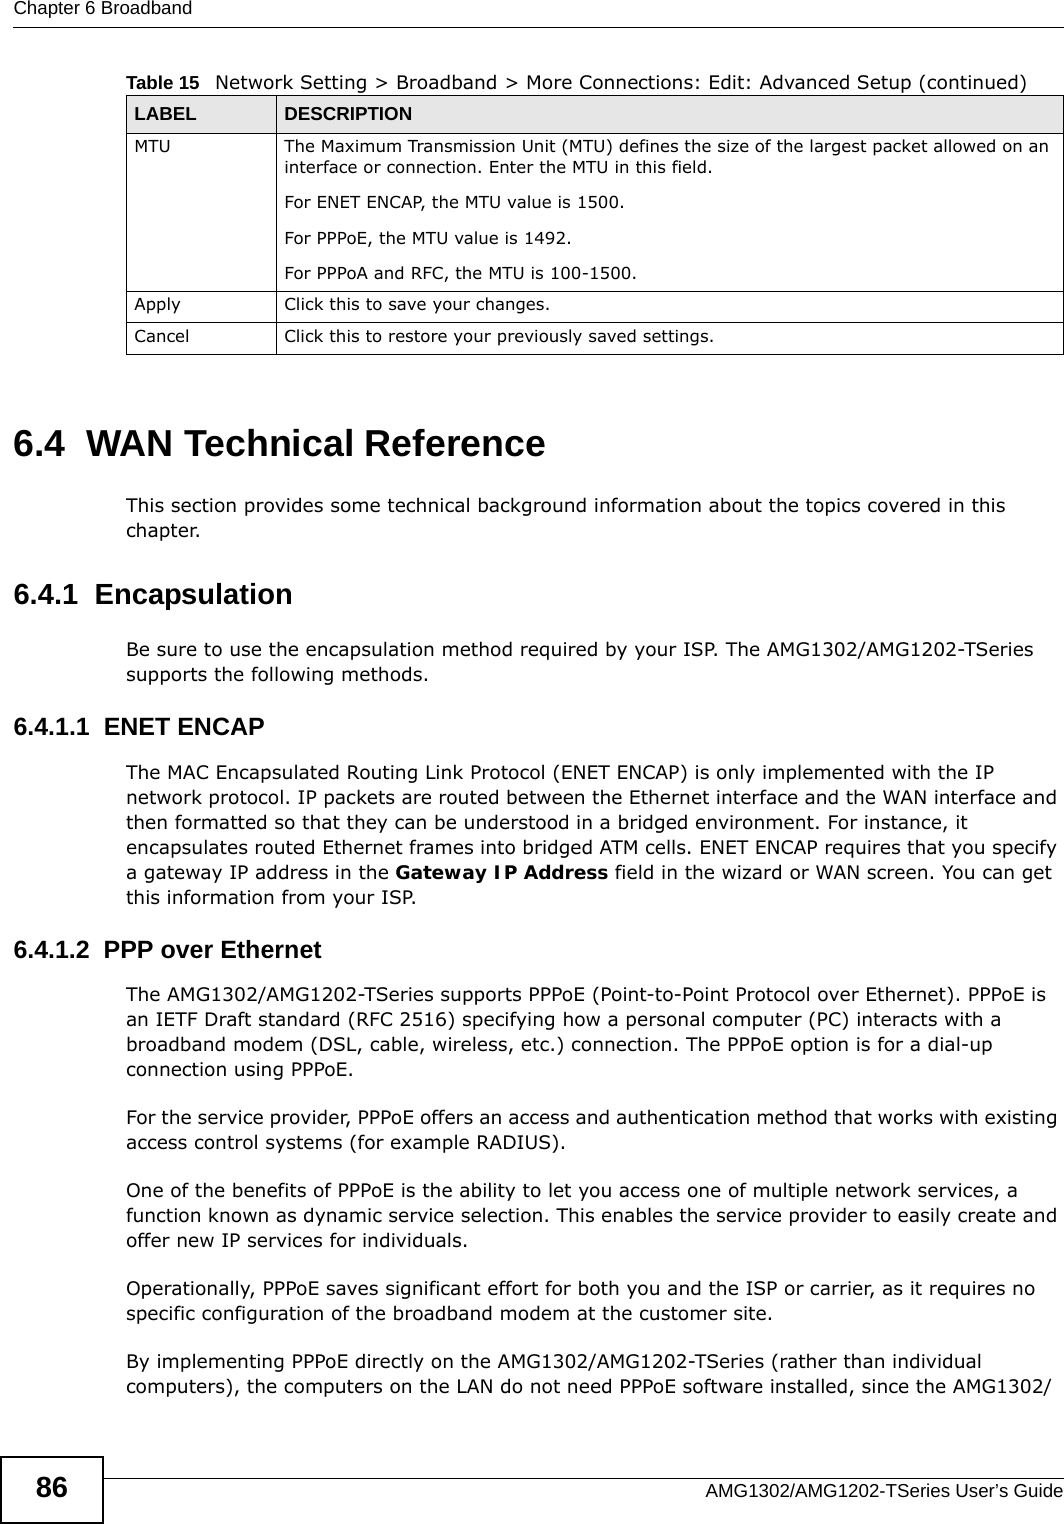 Chapter 6 BroadbandAMG1302/AMG1202-TSeries User’s Guide866.4  WAN Technical ReferenceThis section provides some technical background information about the topics covered in this chapter.6.4.1  EncapsulationBe sure to use the encapsulation method required by your ISP. The AMG1302/AMG1202-TSeries supports the following methods.6.4.1.1  ENET ENCAPThe MAC Encapsulated Routing Link Protocol (ENET ENCAP) is only implemented with the IP network protocol. IP packets are routed between the Ethernet interface and the WAN interface and then formatted so that they can be understood in a bridged environment. For instance, it encapsulates routed Ethernet frames into bridged ATM cells. ENET ENCAP requires that you specify a gateway IP address in the Gateway IP Address field in the wizard or WAN screen. You can get this information from your ISP.6.4.1.2  PPP over EthernetThe AMG1302/AMG1202-TSeries supports PPPoE (Point-to-Point Protocol over Ethernet). PPPoE is an IETF Draft standard (RFC 2516) specifying how a personal computer (PC) interacts with a broadband modem (DSL, cable, wireless, etc.) connection. The PPPoE option is for a dial-up connection using PPPoE.For the service provider, PPPoE offers an access and authentication method that works with existing access control systems (for example RADIUS).One of the benefits of PPPoE is the ability to let you access one of multiple network services, a function known as dynamic service selection. This enables the service provider to easily create and offer new IP services for individuals.Operationally, PPPoE saves significant effort for both you and the ISP or carrier, as it requires no specific configuration of the broadband modem at the customer site.By implementing PPPoE directly on the AMG1302/AMG1202-TSeries (rather than individual computers), the computers on the LAN do not need PPPoE software installed, since the AMG1302/MTU The Maximum Transmission Unit (MTU) defines the size of the largest packet allowed on an interface or connection. Enter the MTU in this field.For ENET ENCAP, the MTU value is 1500.For PPPoE, the MTU value is 1492.For PPPoA and RFC, the MTU is 100-1500.Apply Click this to save your changes. Cancel Click this to restore your previously saved settings.Table 15   Network Setting &gt; Broadband &gt; More Connections: Edit: Advanced Setup (continued)LABEL DESCRIPTION